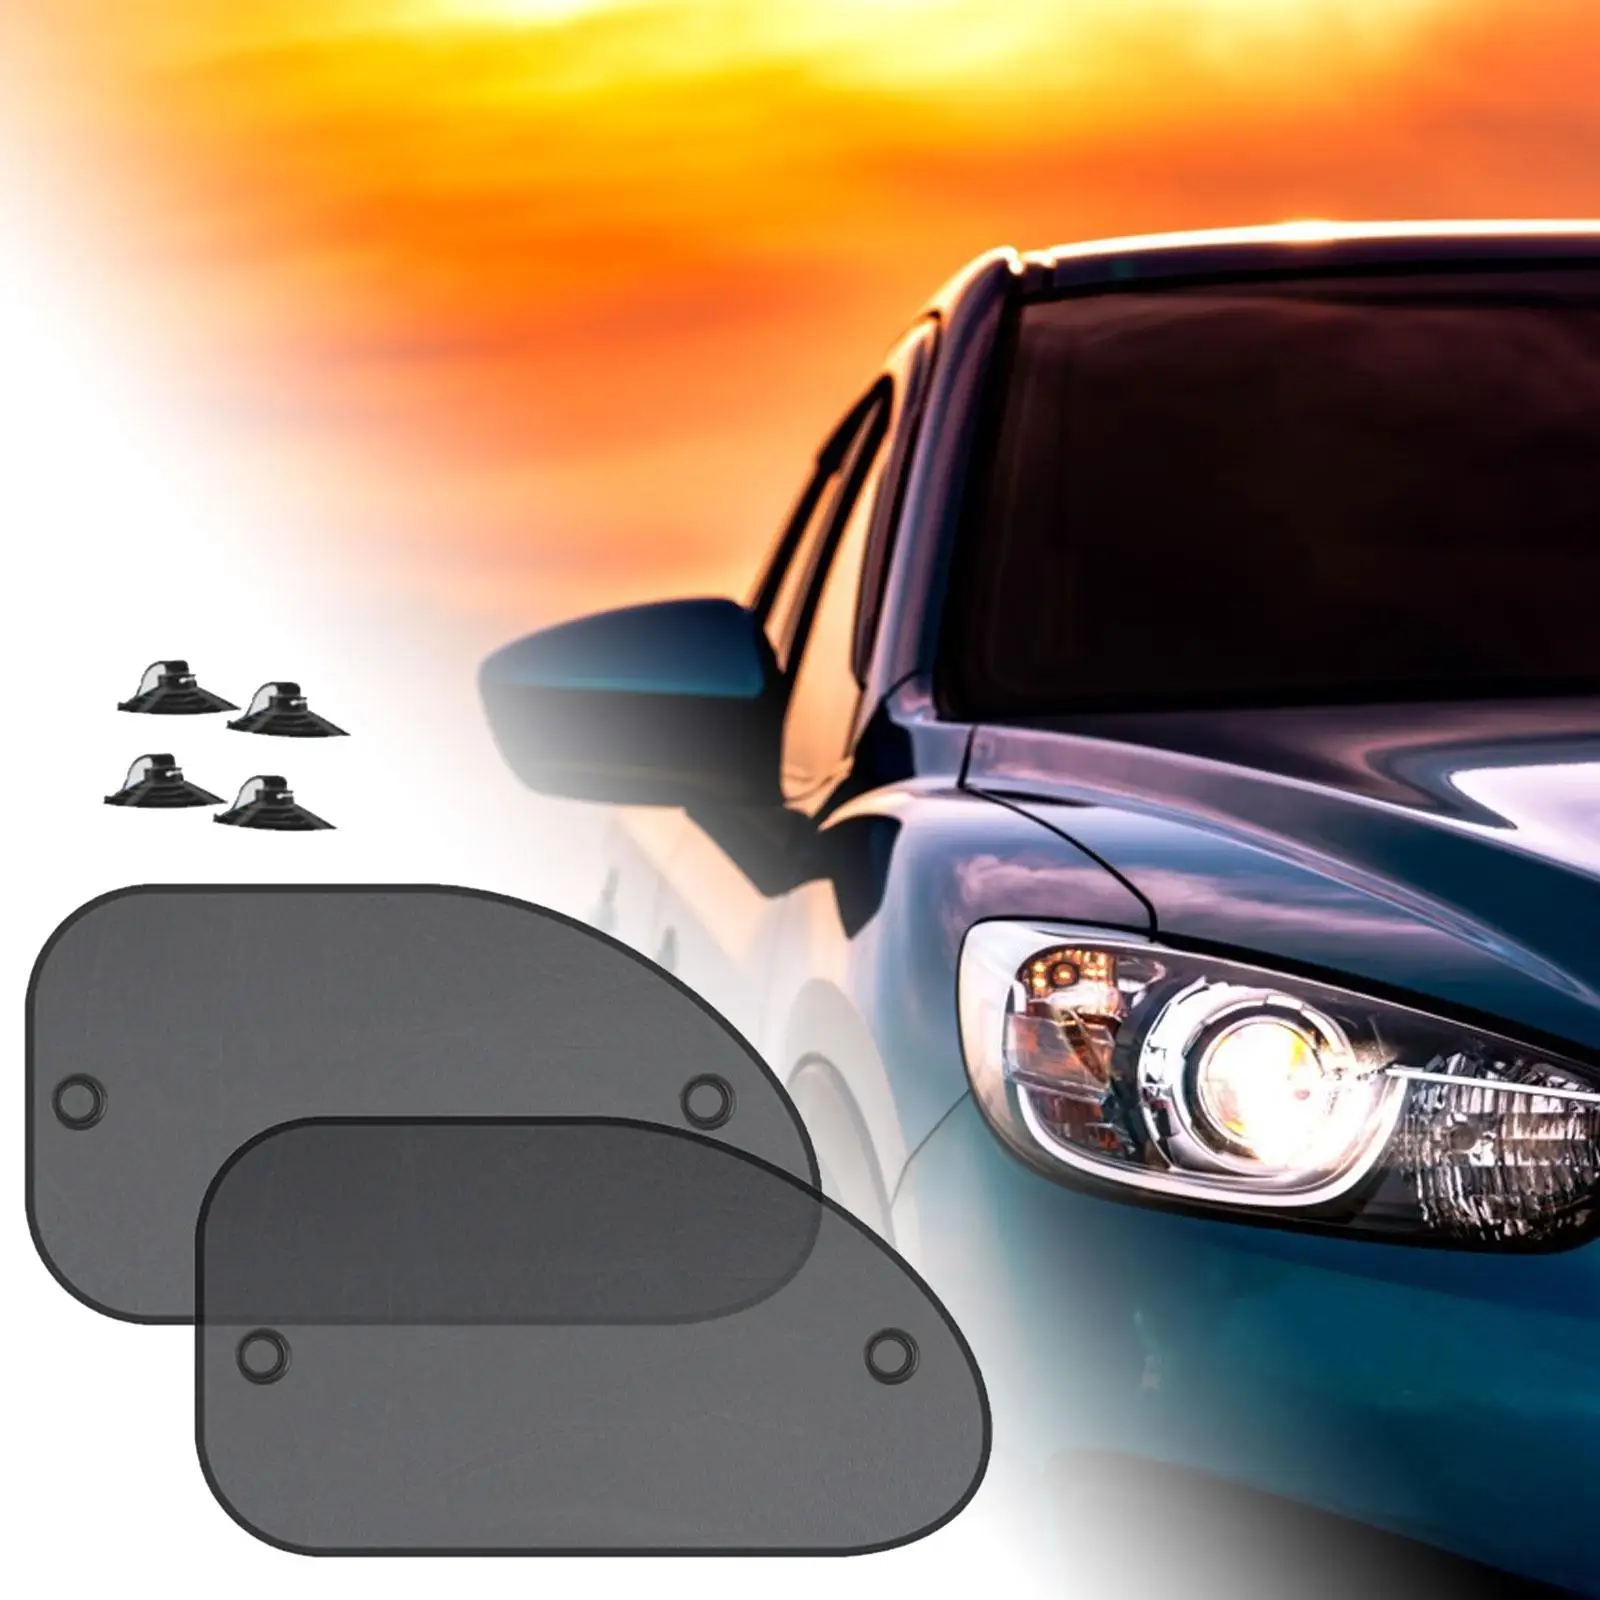 2 Pieces Car Window Shades Curtain Privacy Protect Car Sun Shade for Camping Most of Vehicle Changing Clothes Taking A Nap